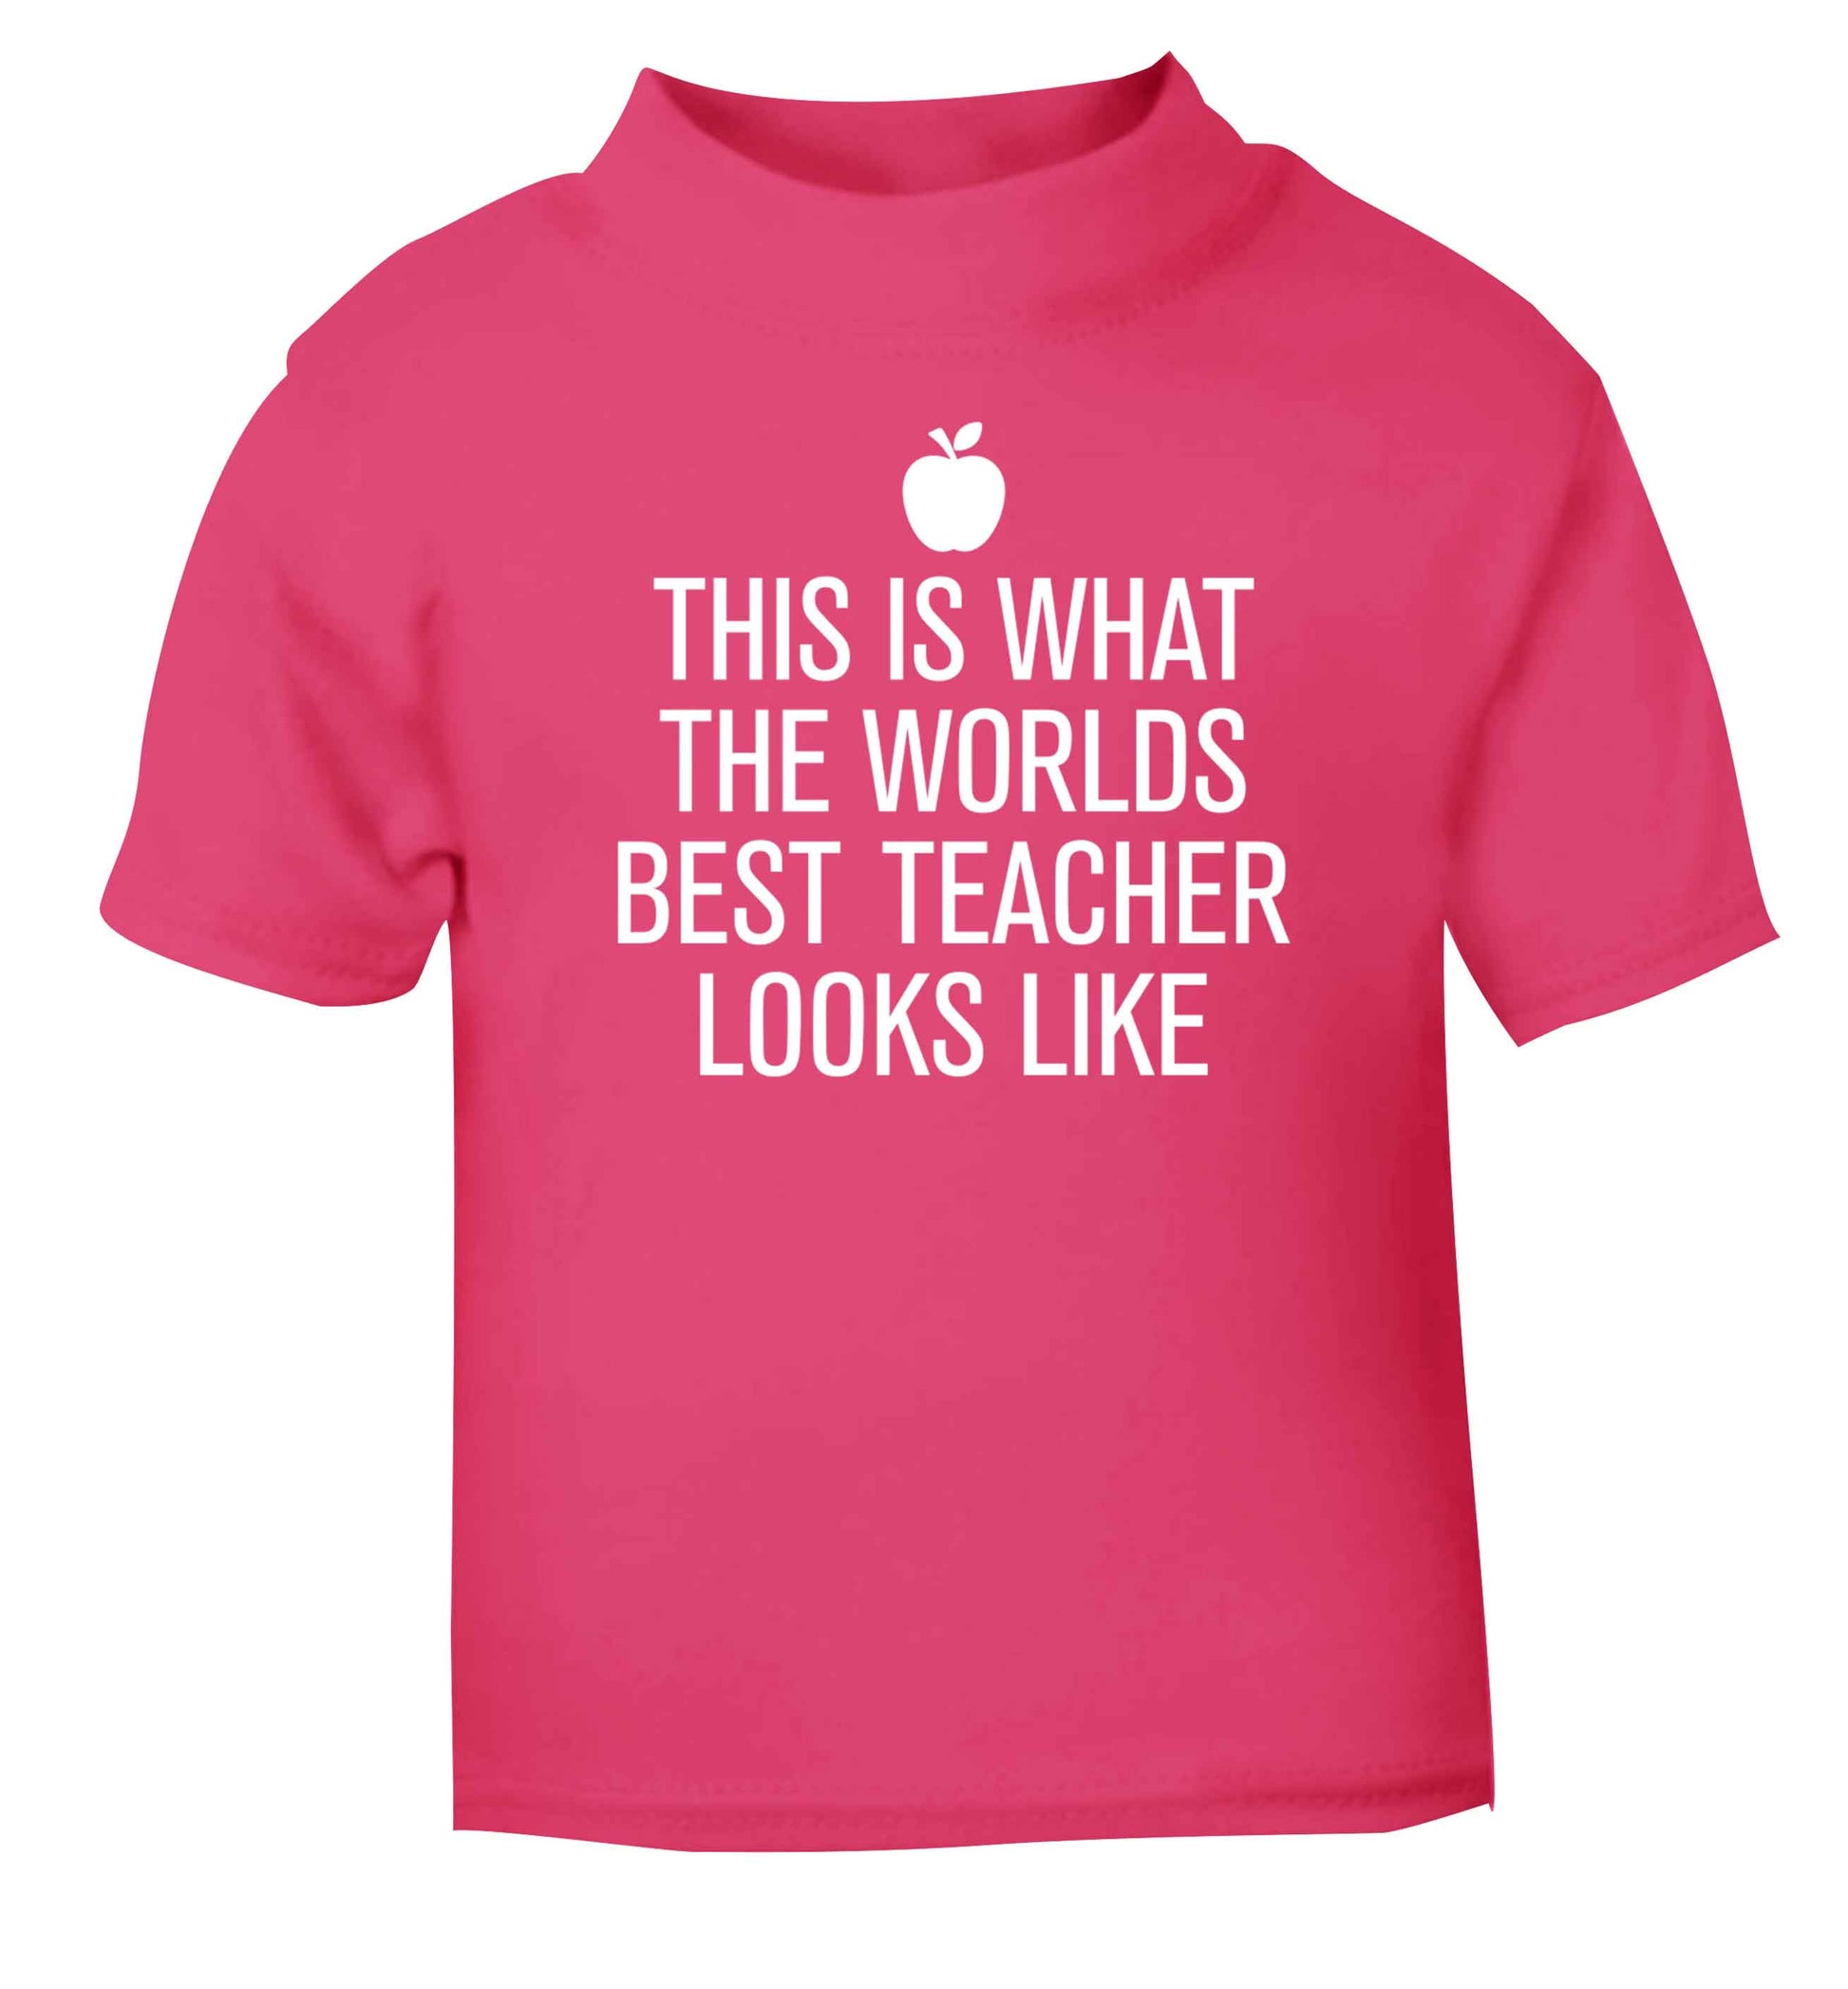 This is what the worlds best teacher looks like pink baby toddler Tshirt 2 Years